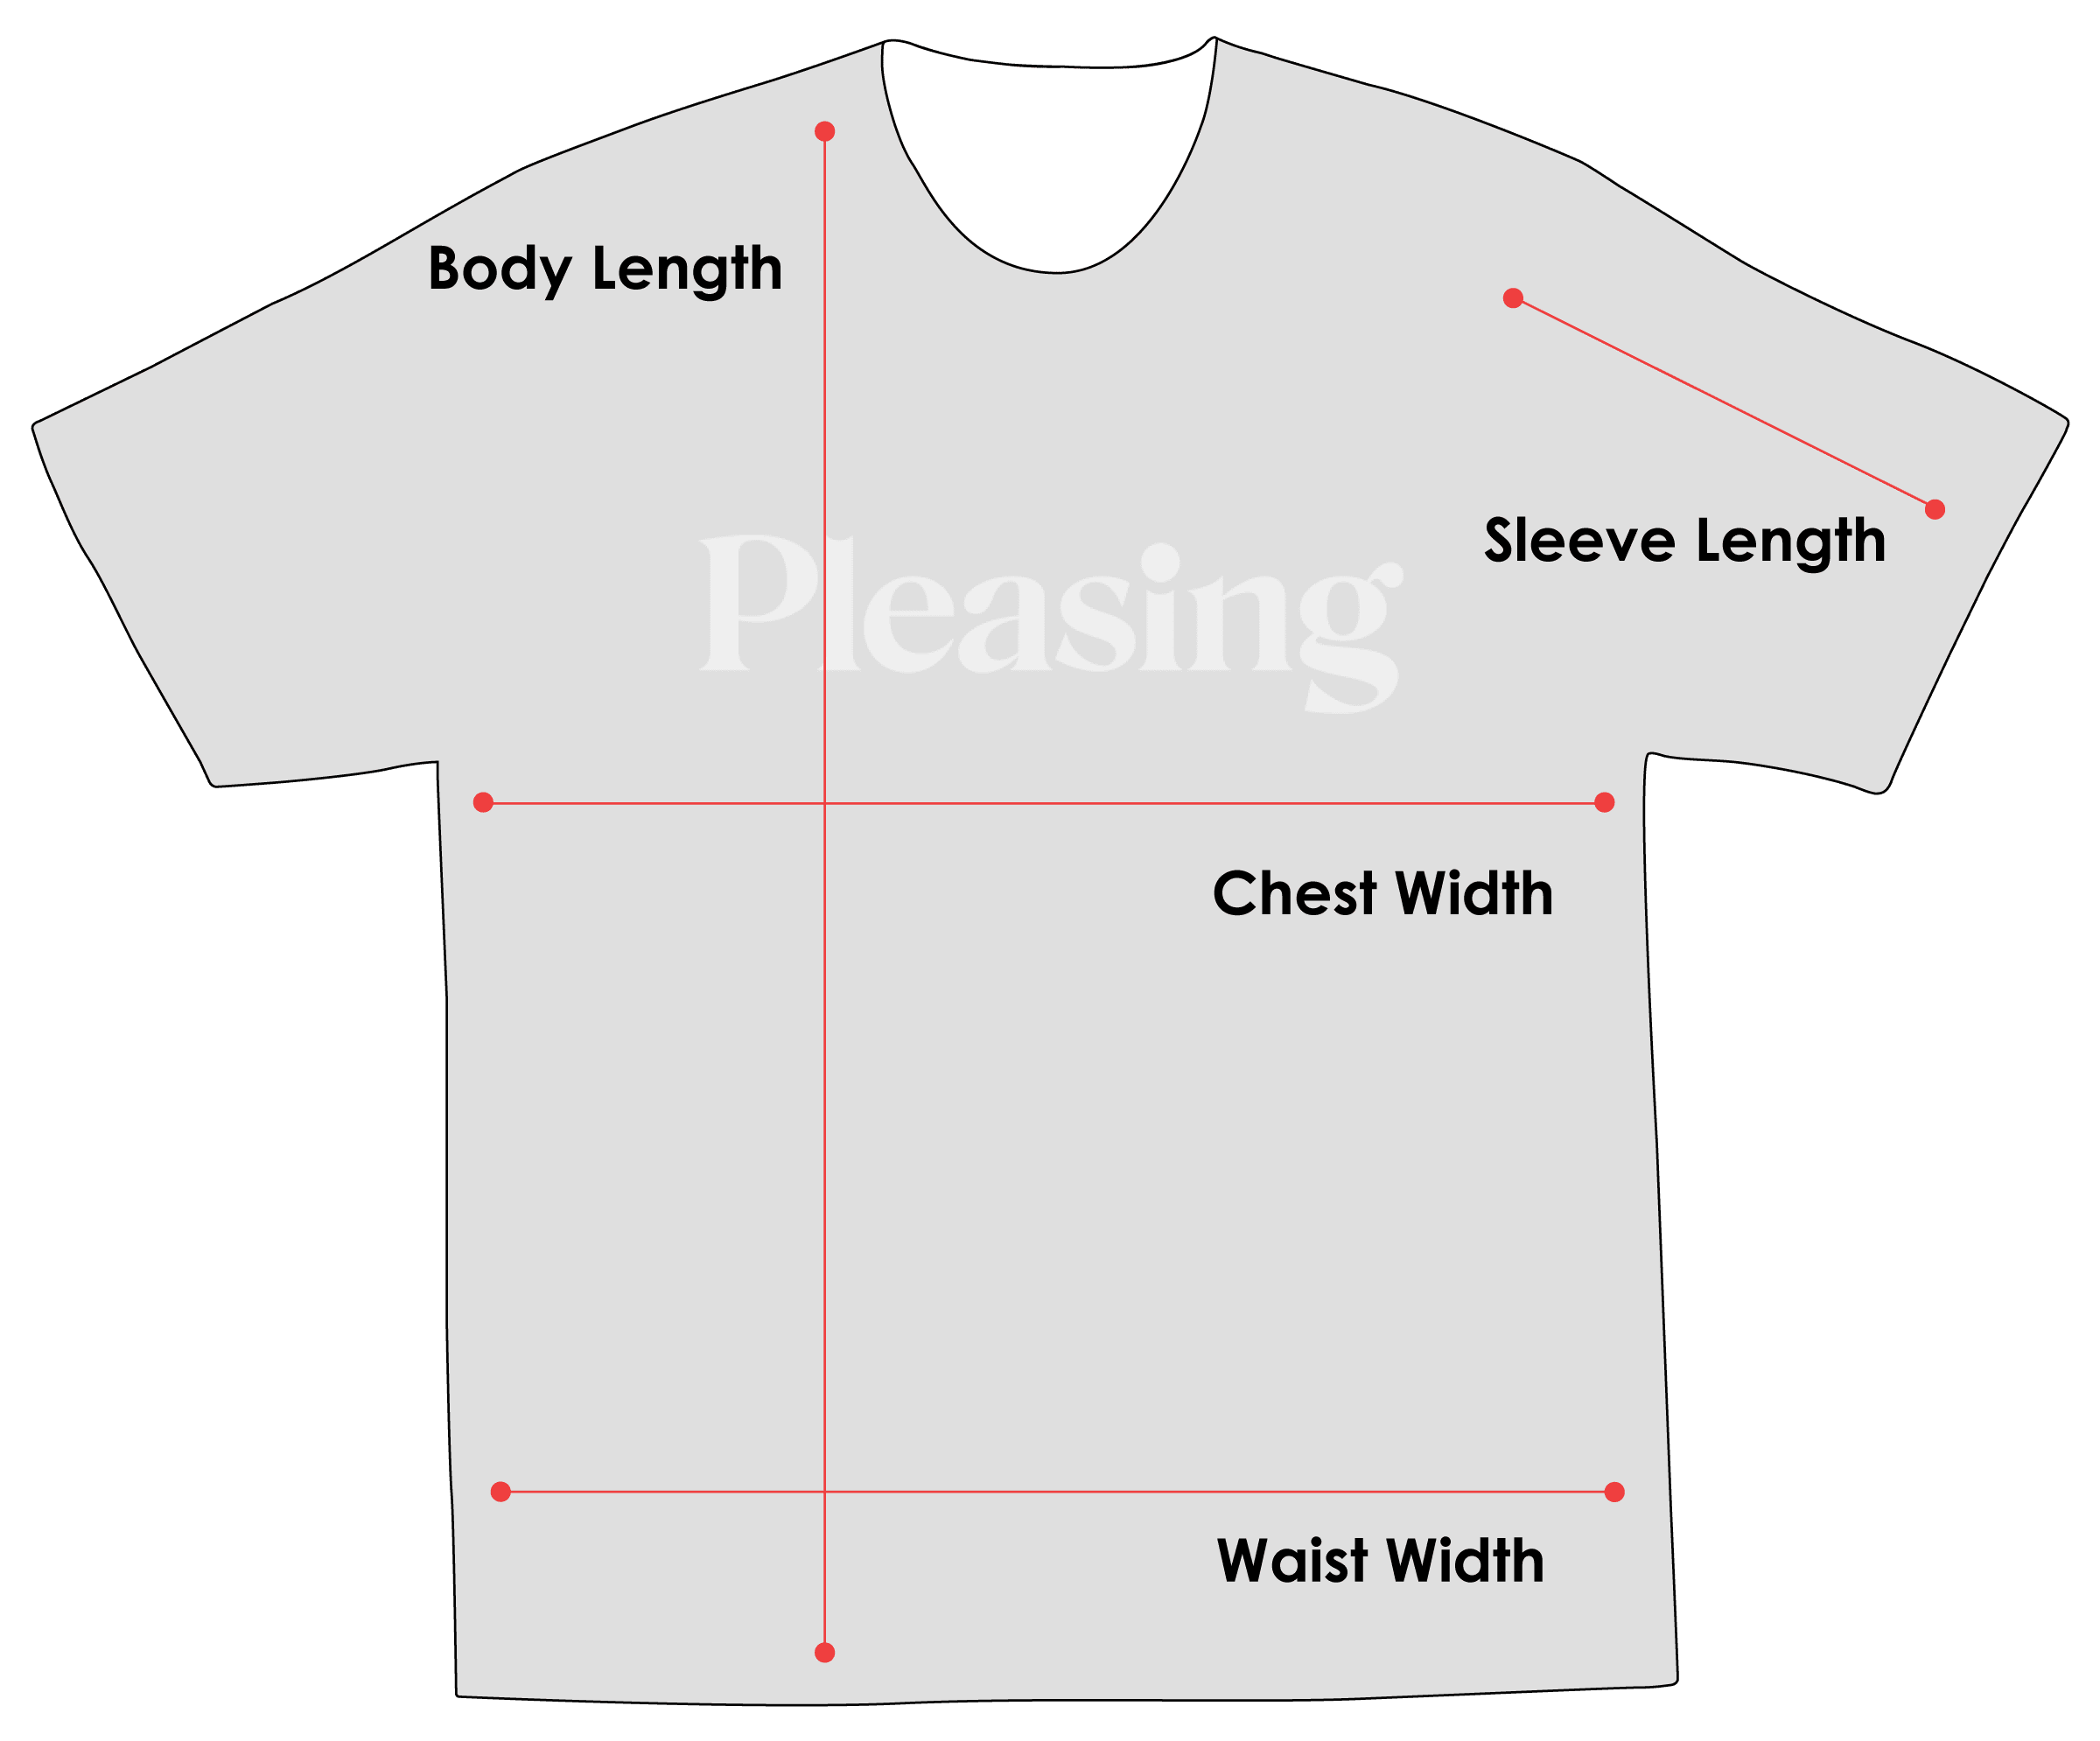 Pleasing T-Shirt Size Guide